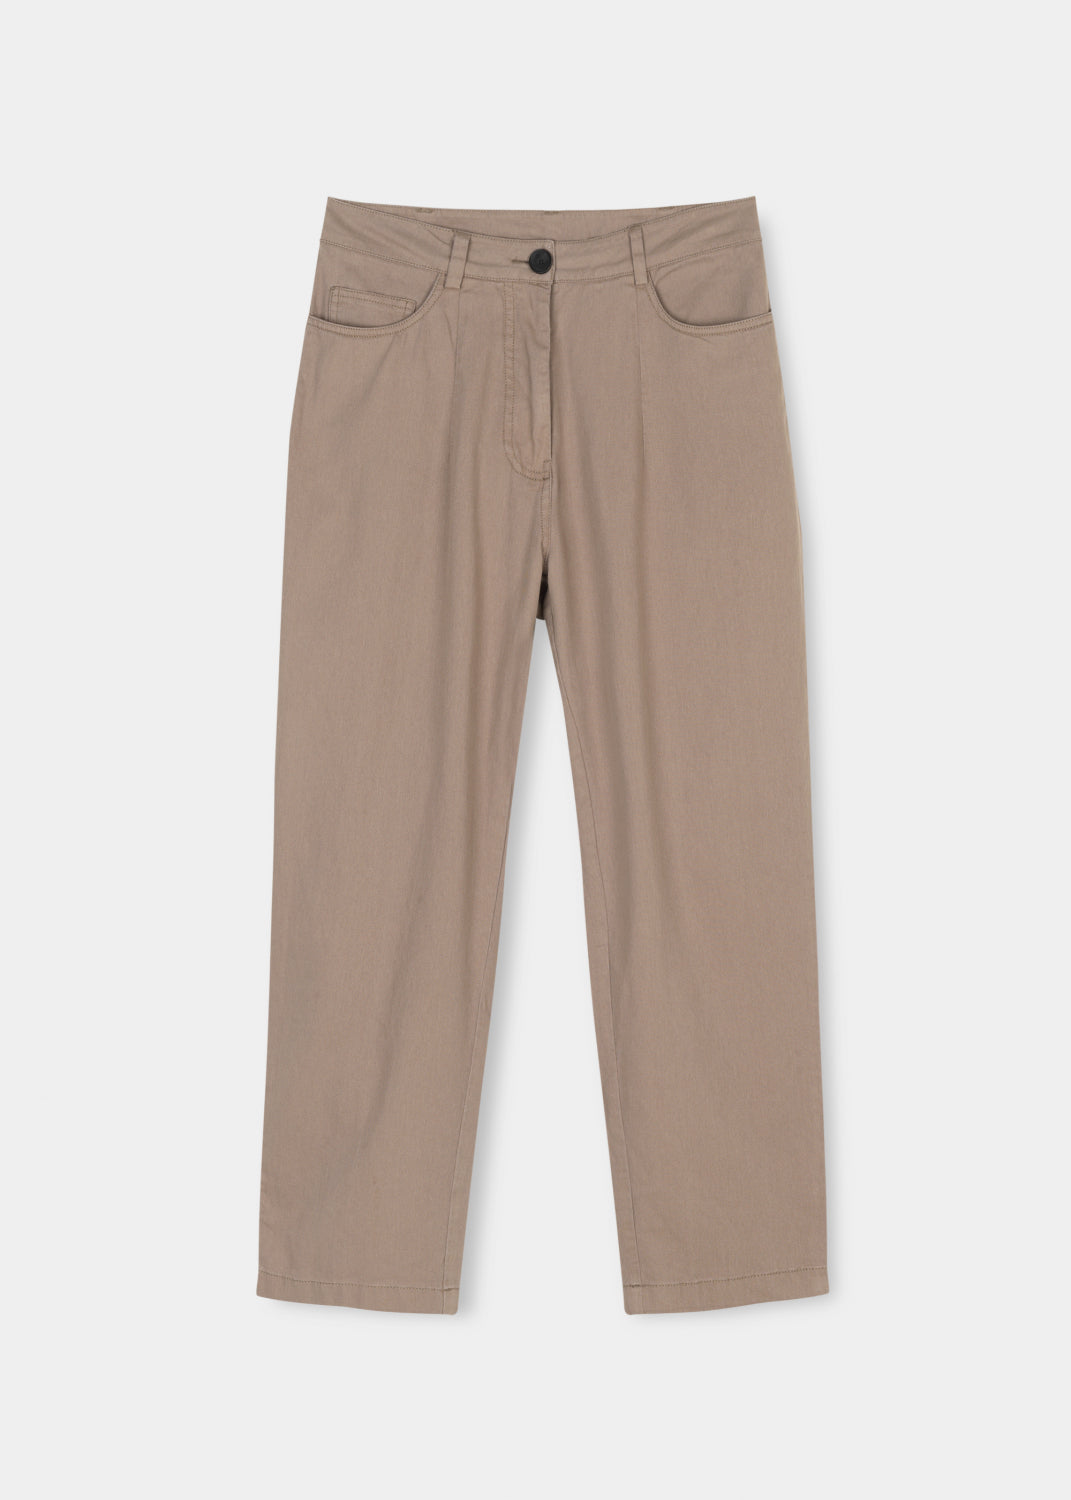 Aiayu "Isabel Pant Twill" Cocoa